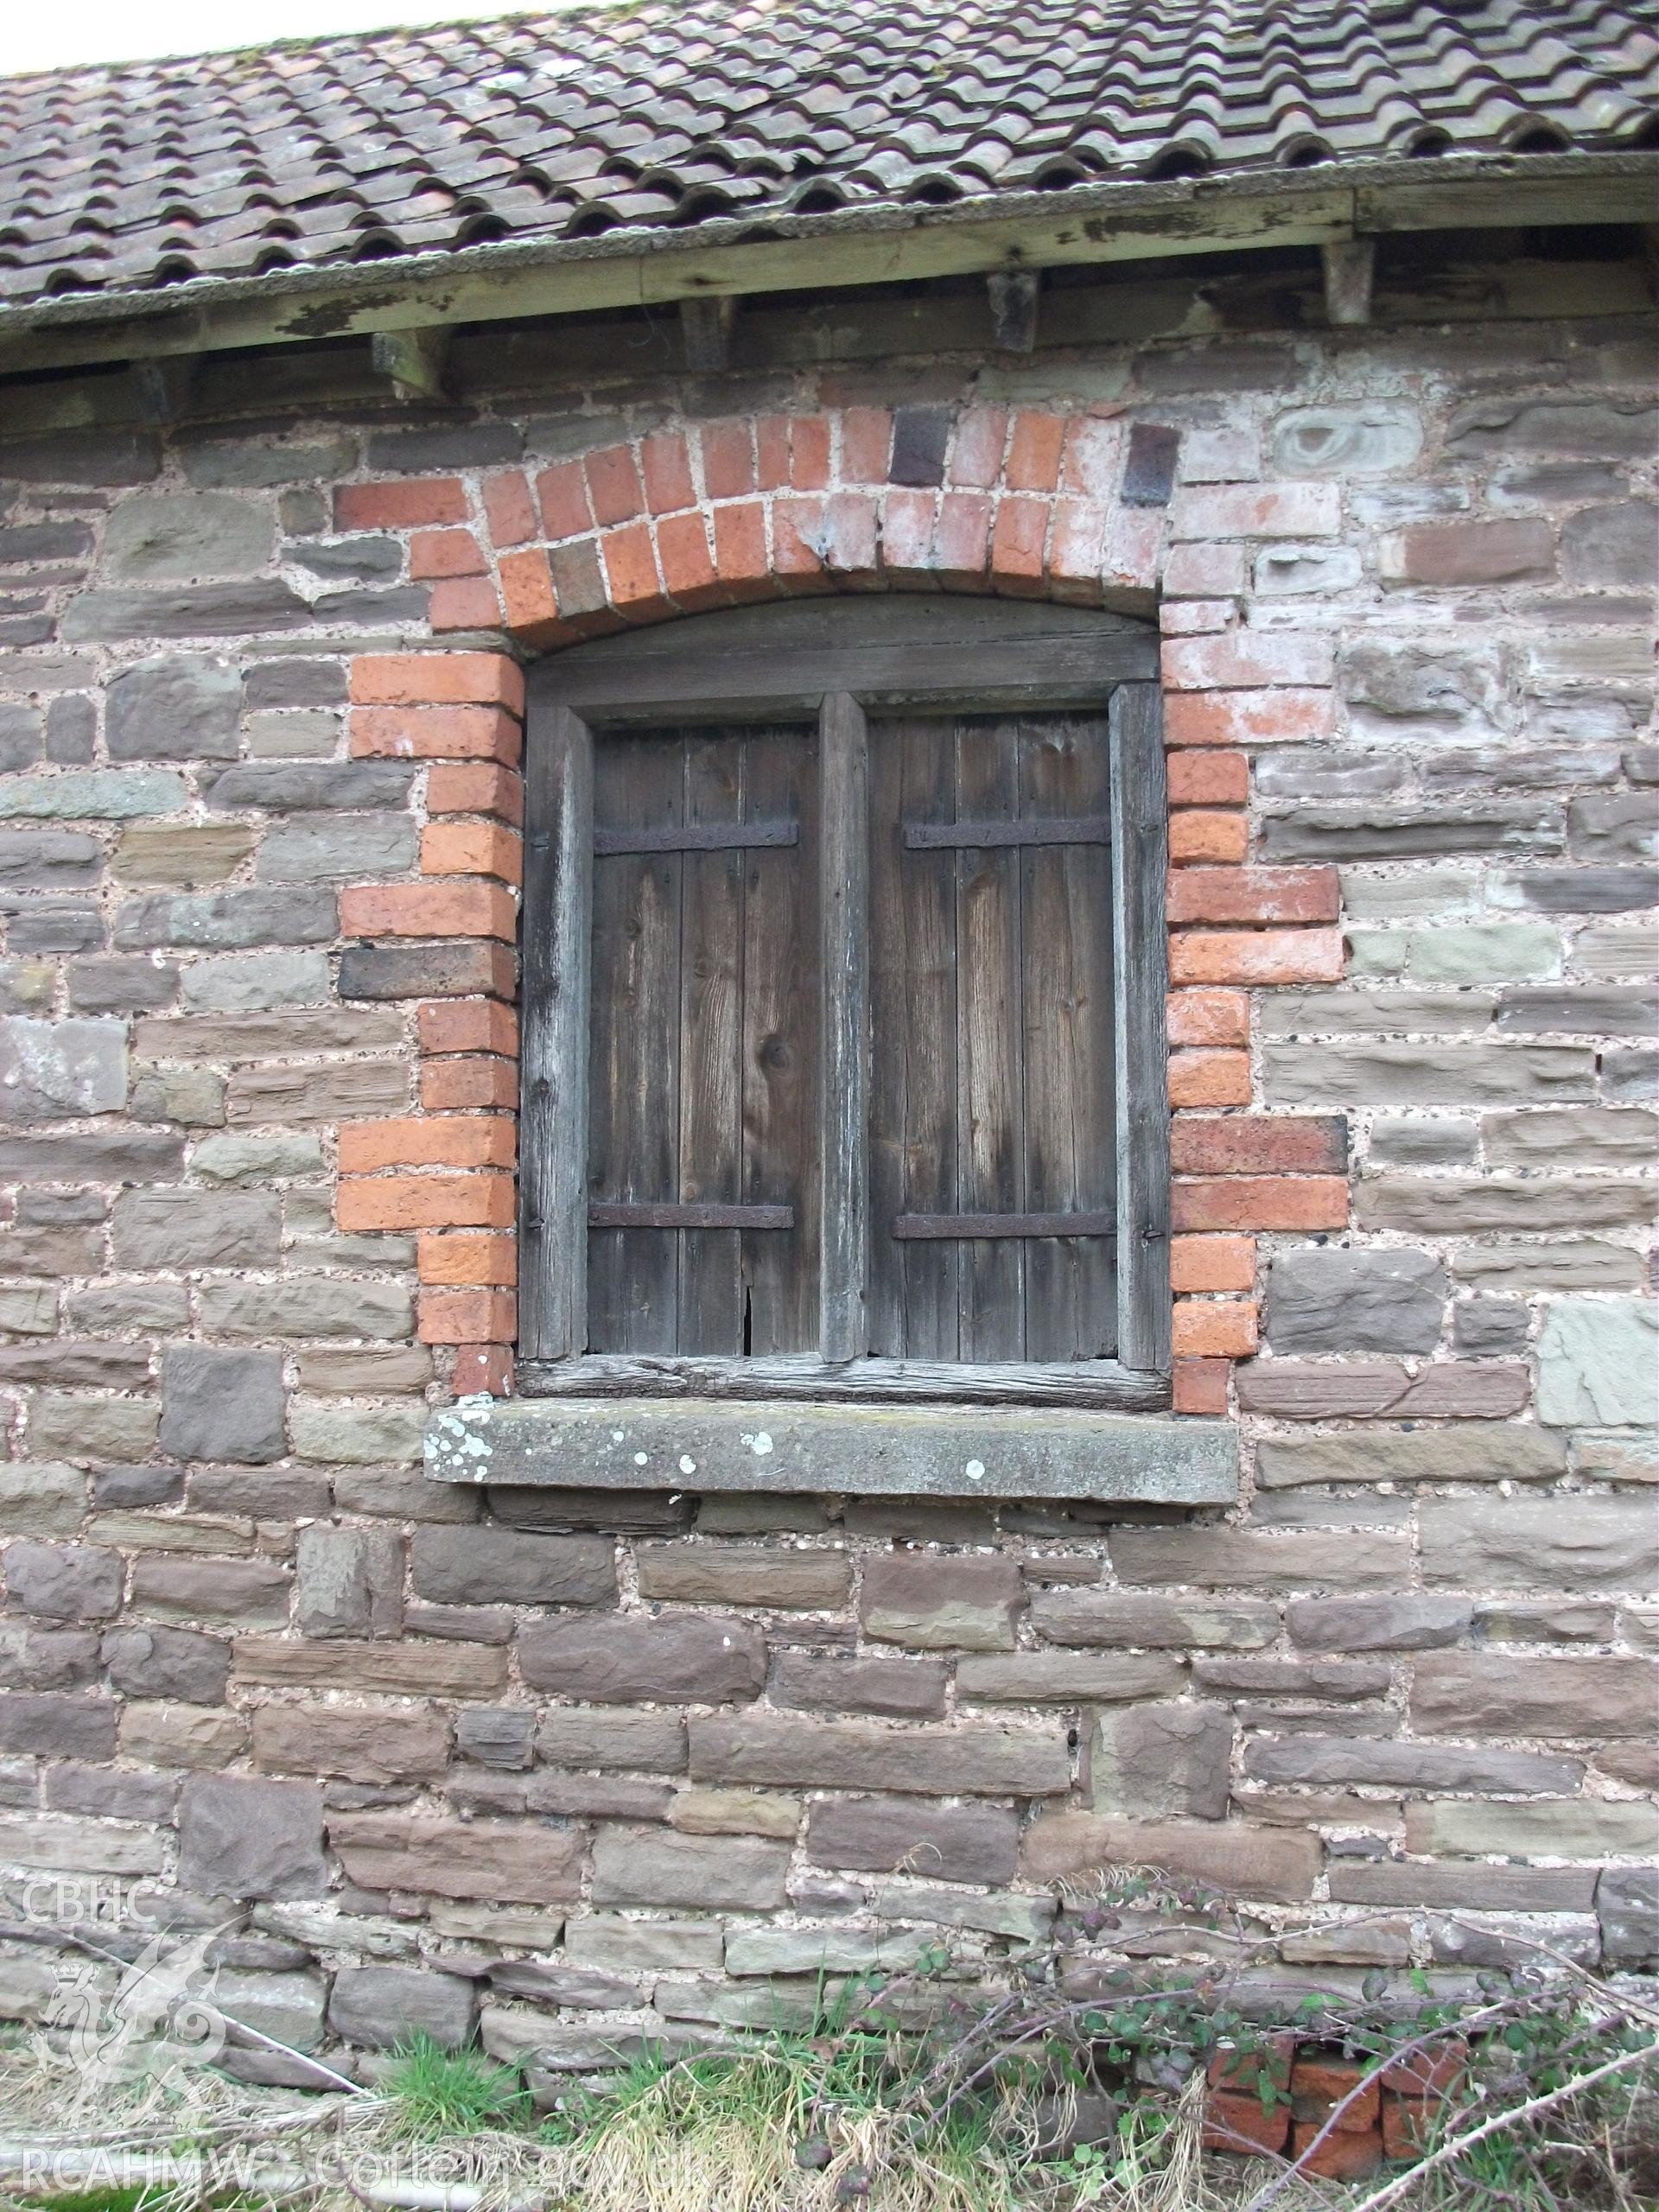 Colour digital photograph of exterior of barn - window; at Llangwm Isaf Farm, received in the course of Emergency Recording case ref no RCS2/1/1599.